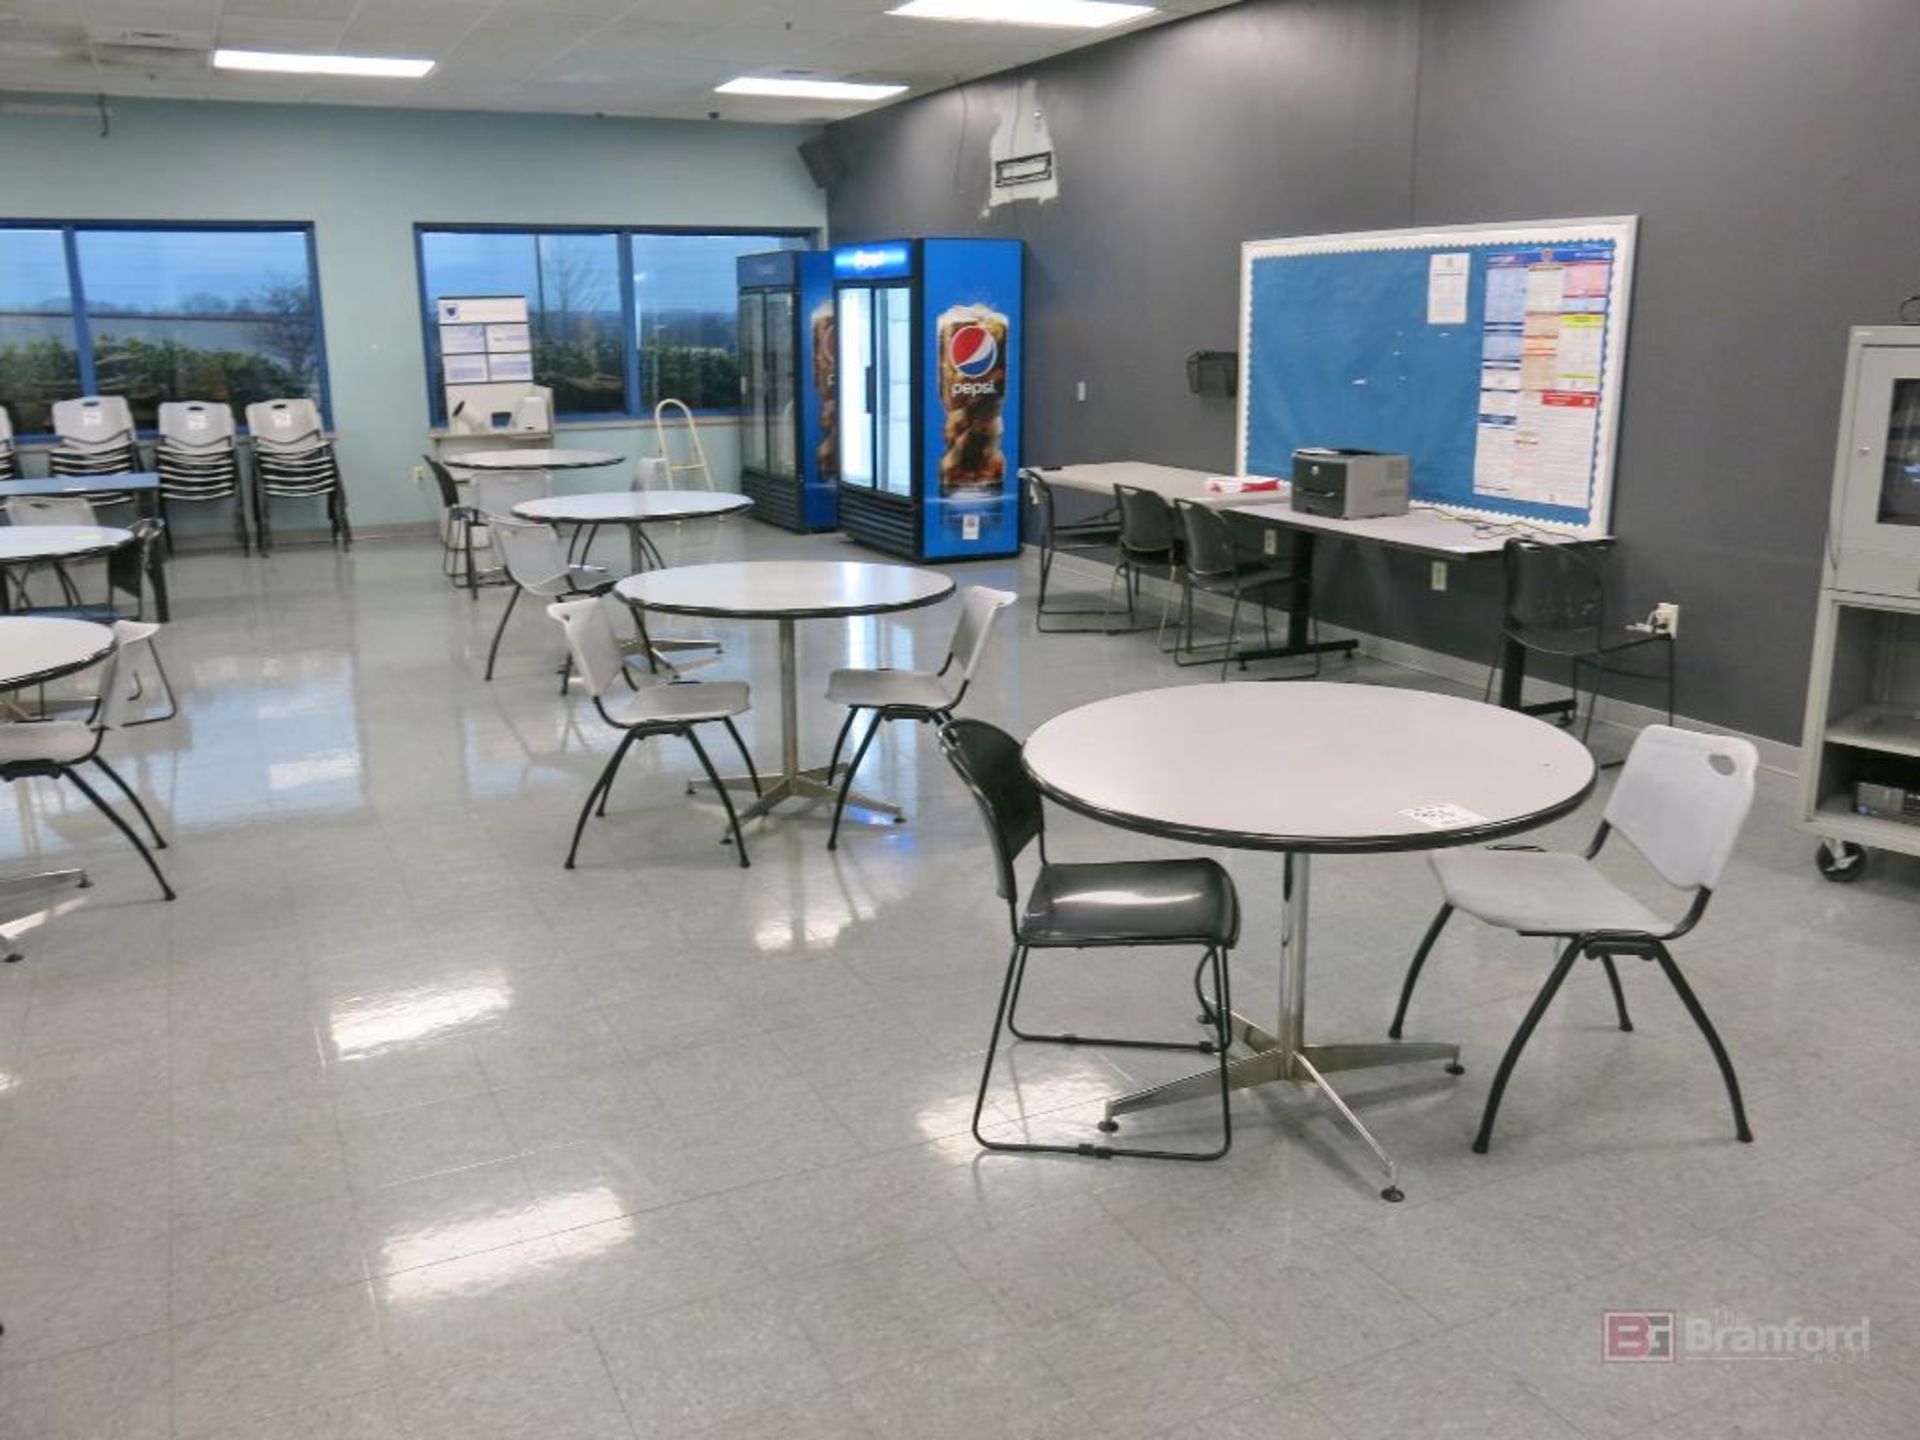 Lot of Approx. (20) Cafeteria Style Tables w/ Associated Chairs - Image 3 of 5